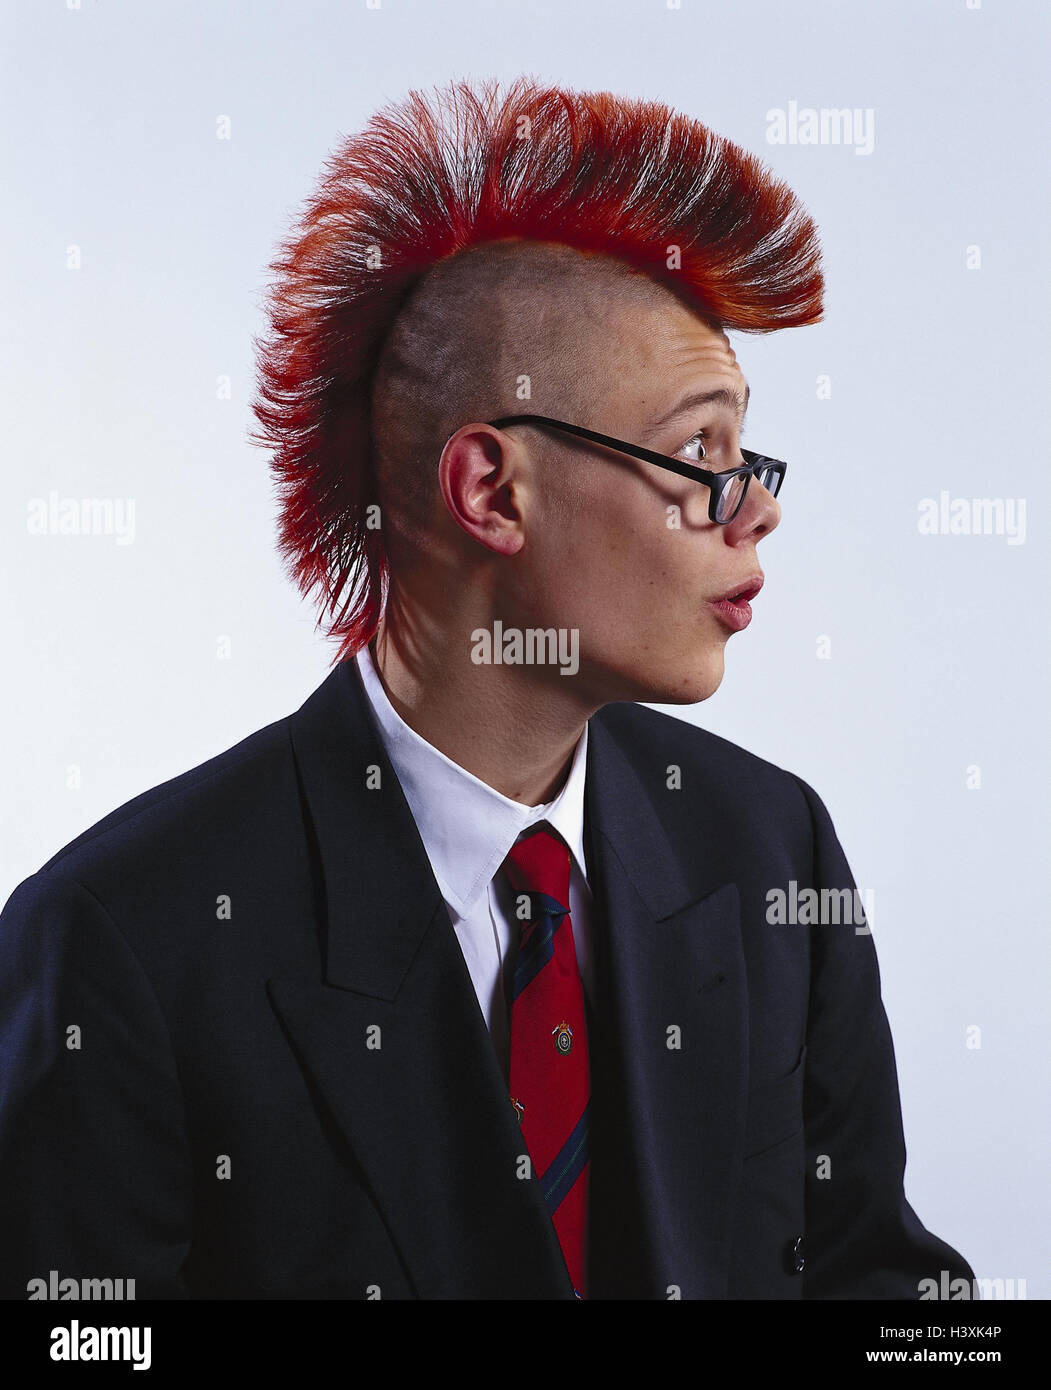 Man, young, suit, tie, punk hairstyle, glasses, facial play punk, punk,  young person, hairs, red, Irokesen editing, portrait, side view, tread,  studio, cut out Stock Photo - Alamy